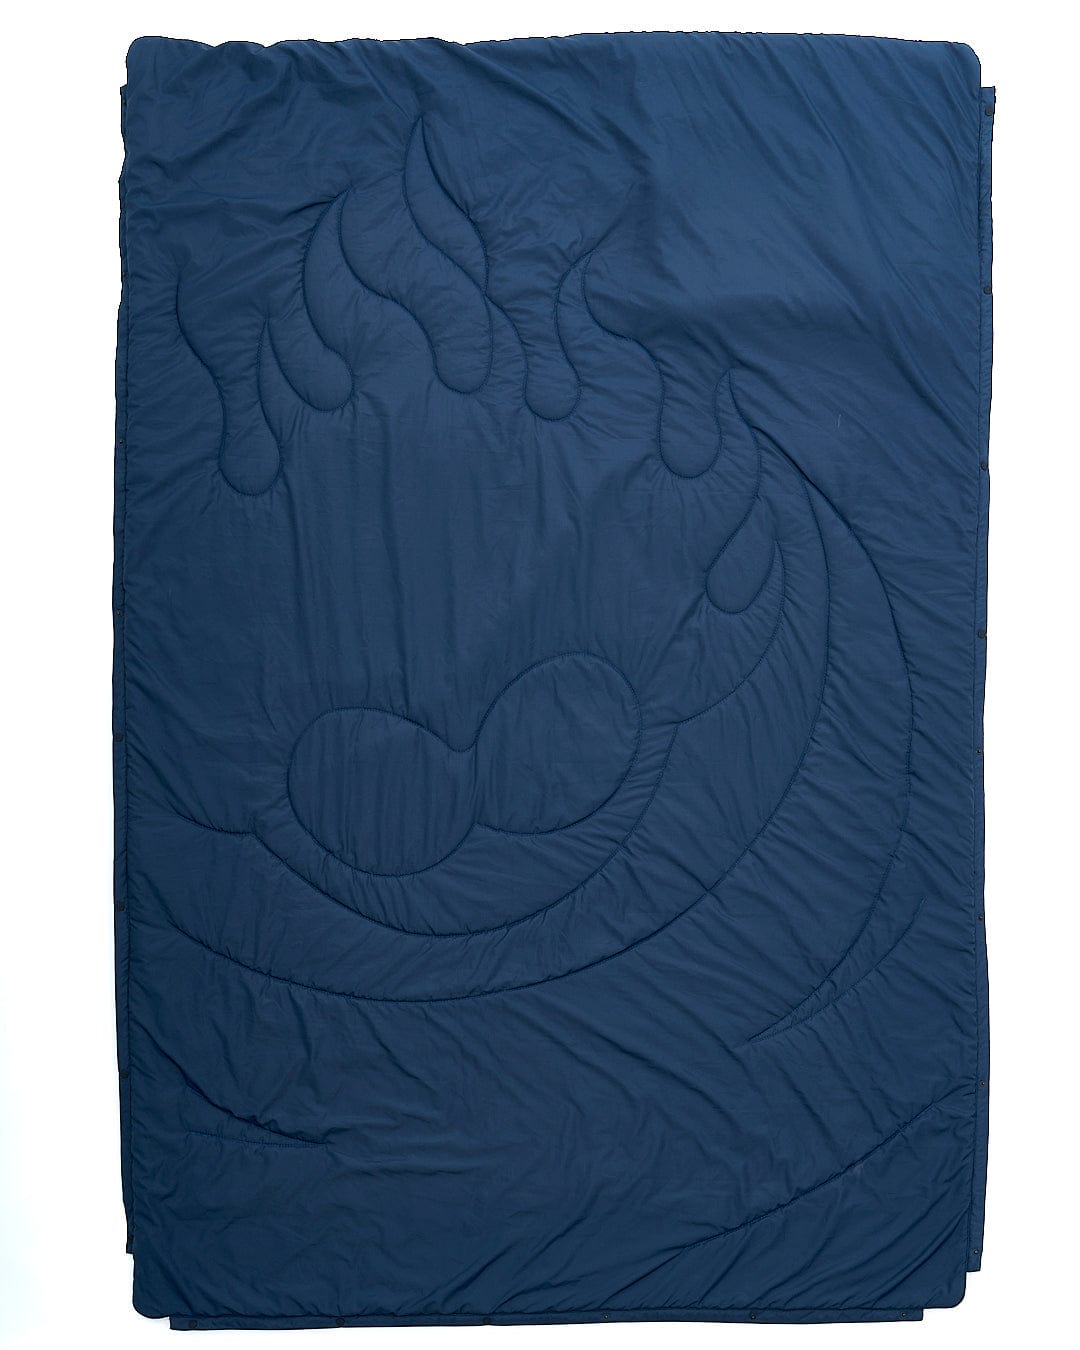 A Yogi - Camping Blanket - Blue with flames on it. (Brand: Saltrock)